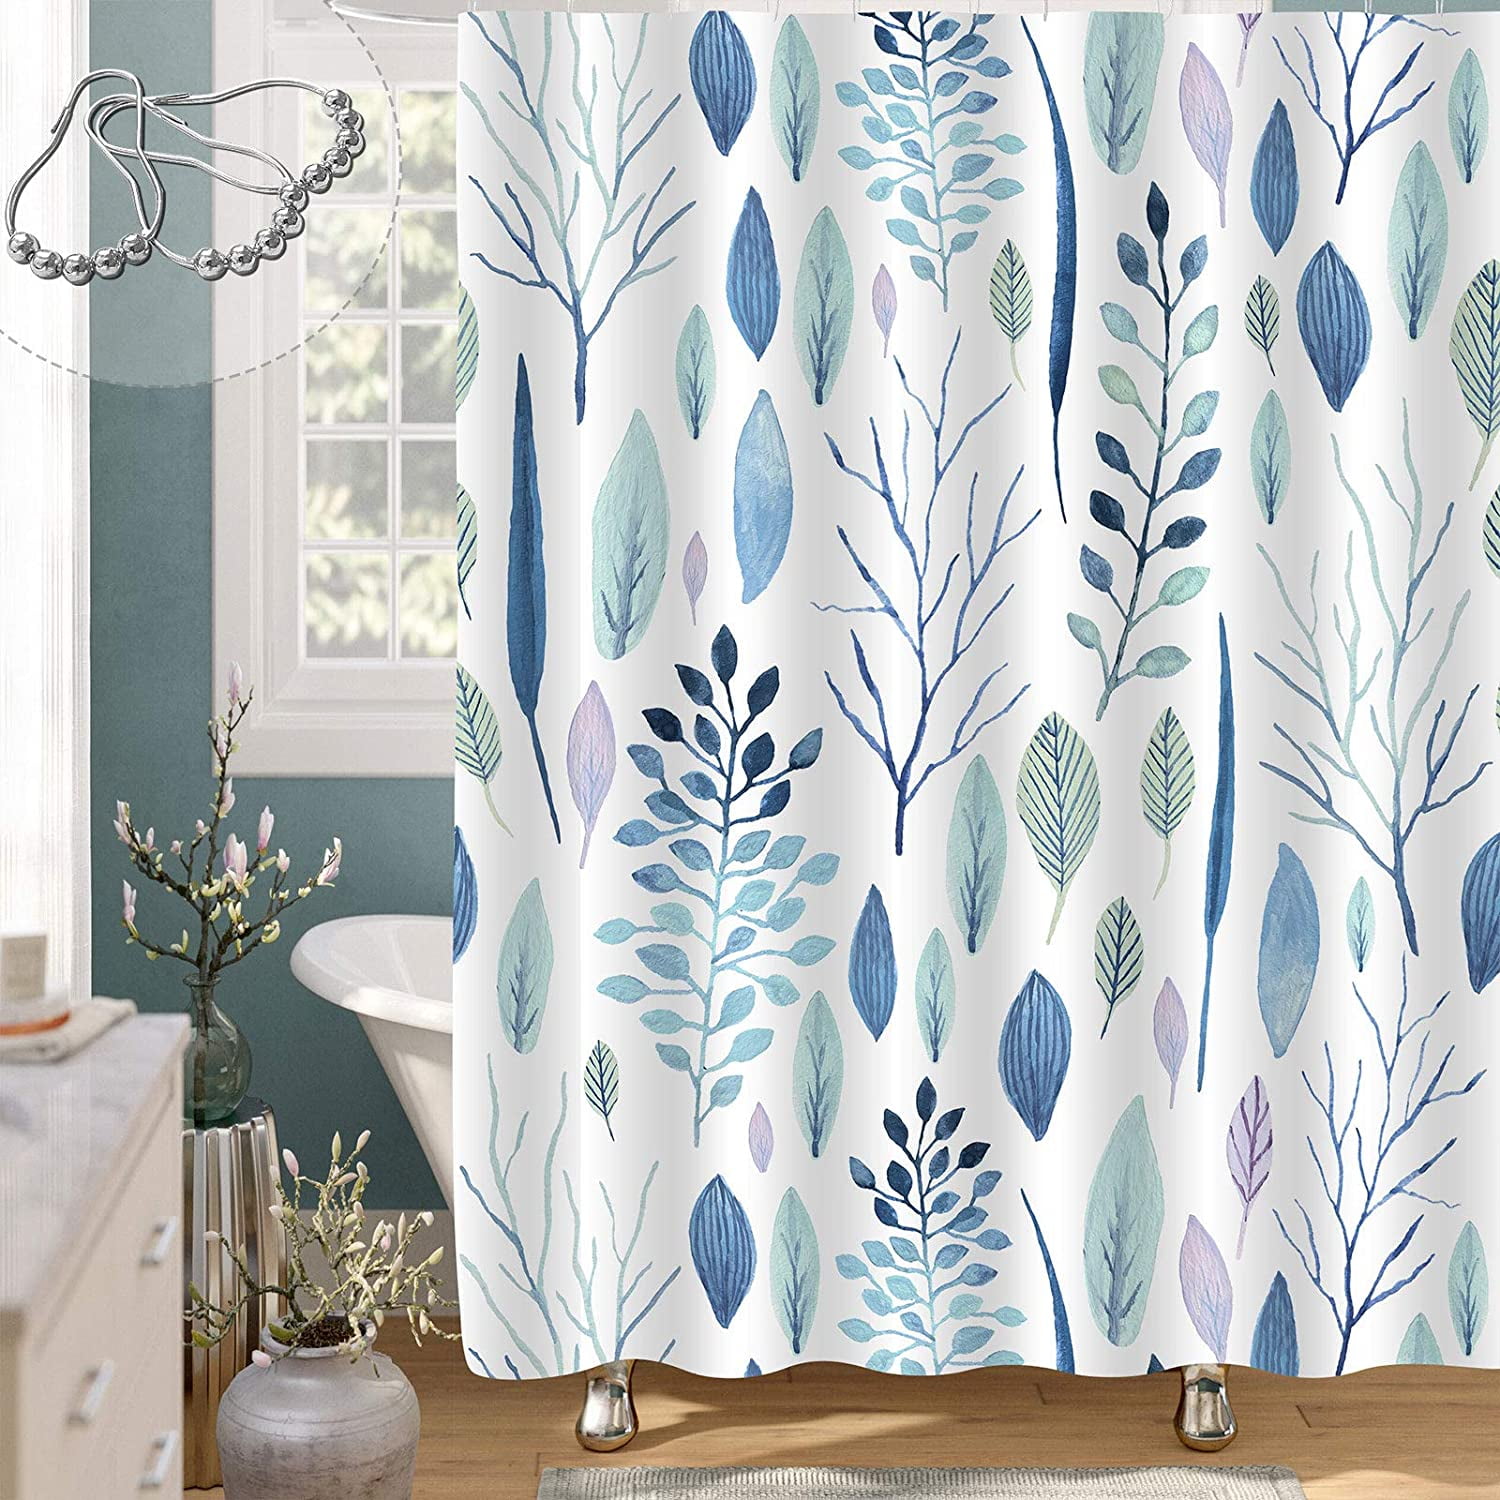 Plant Shower Curtain Abstract Colored Leaves Print for Bathroom 